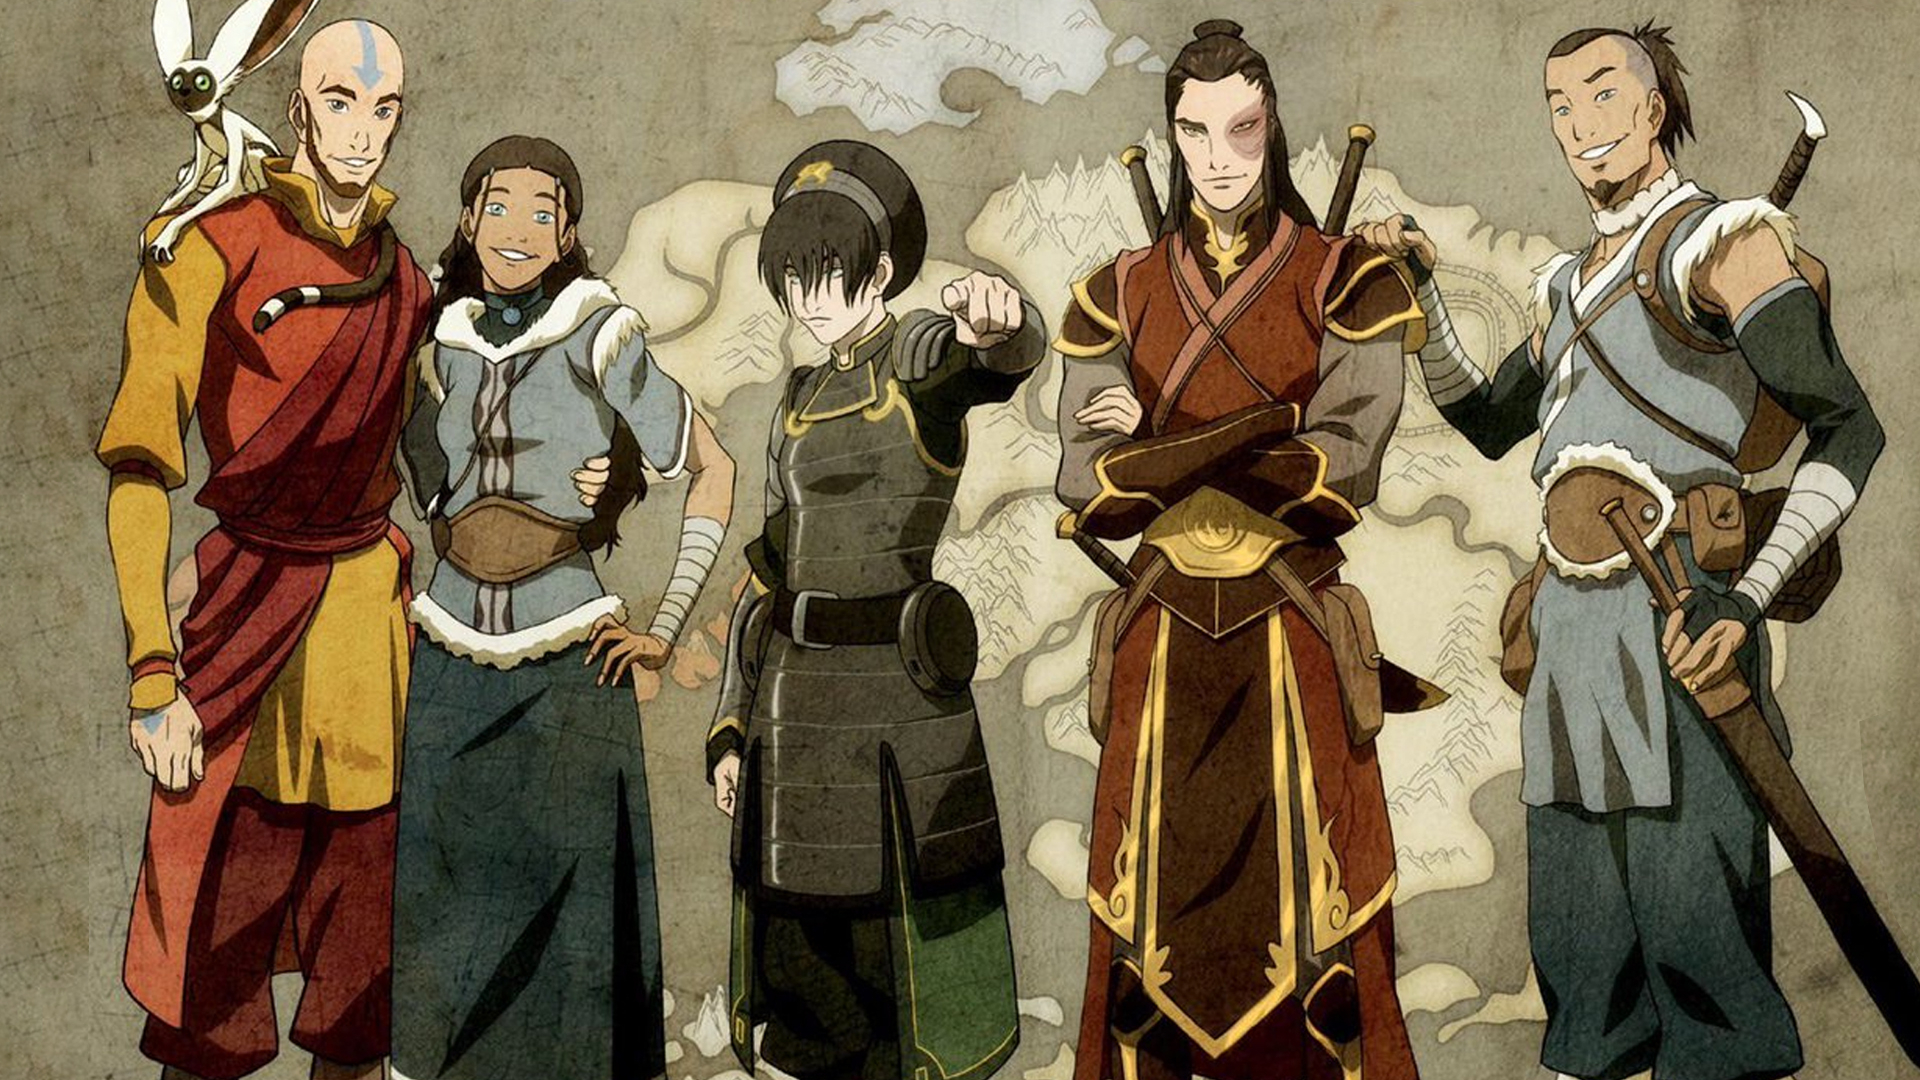 Avatar The Last Airbender release updates Will there be a new season